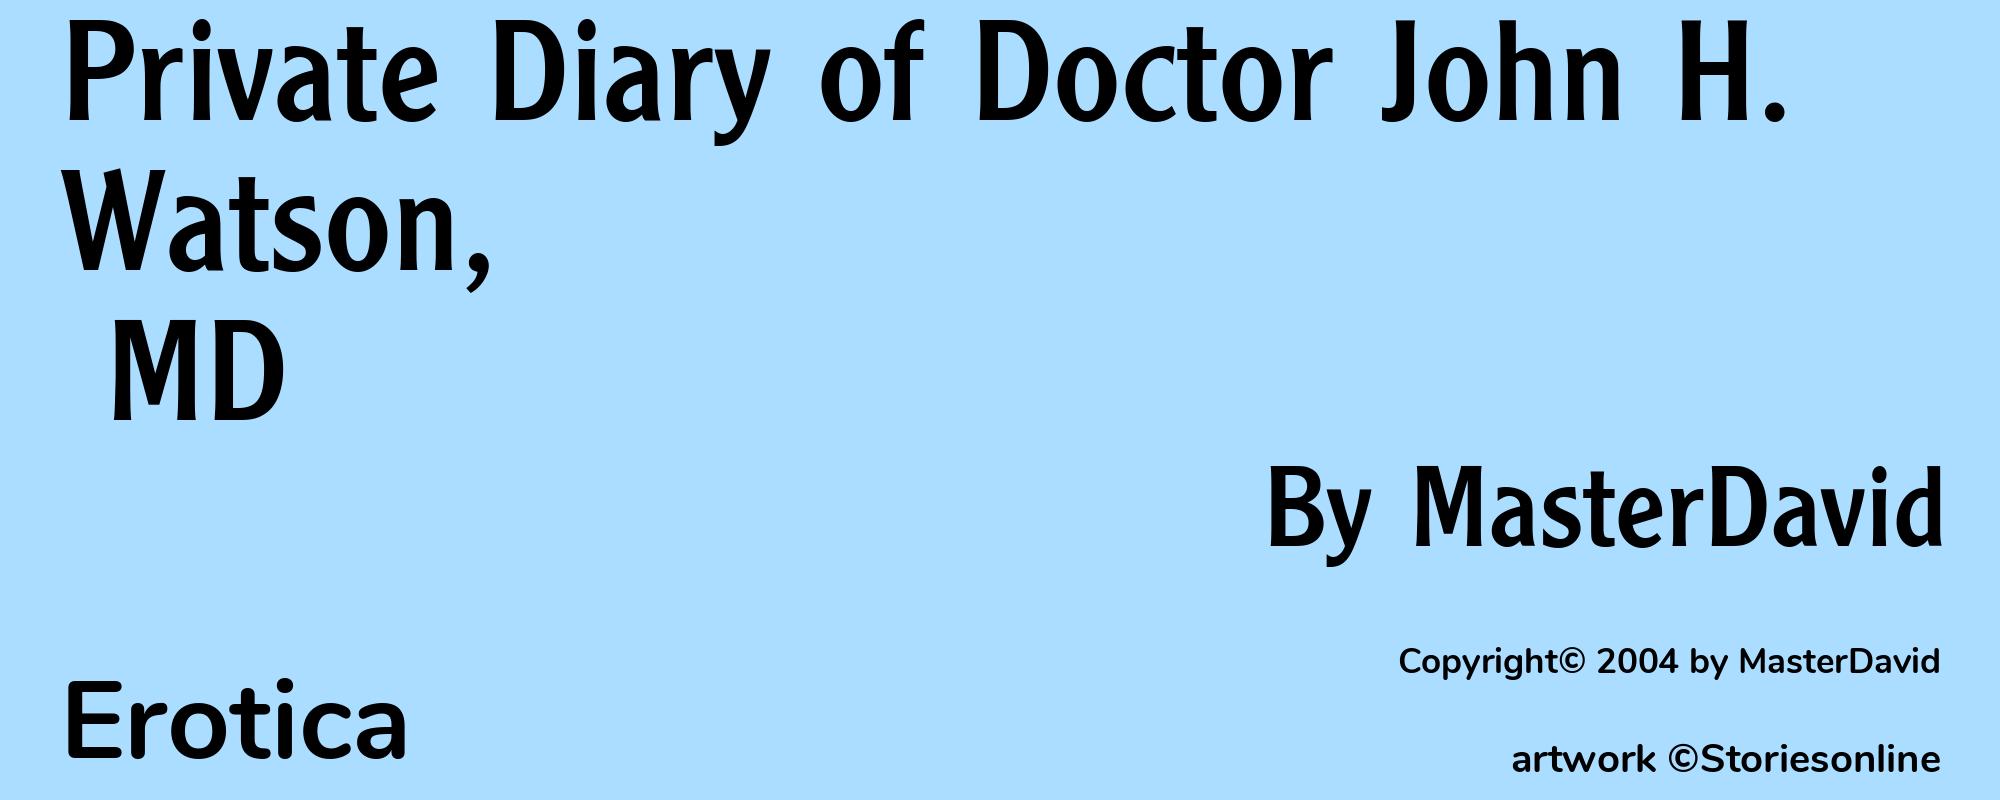 Private Diary of Doctor John H. Watson, MD - Cover